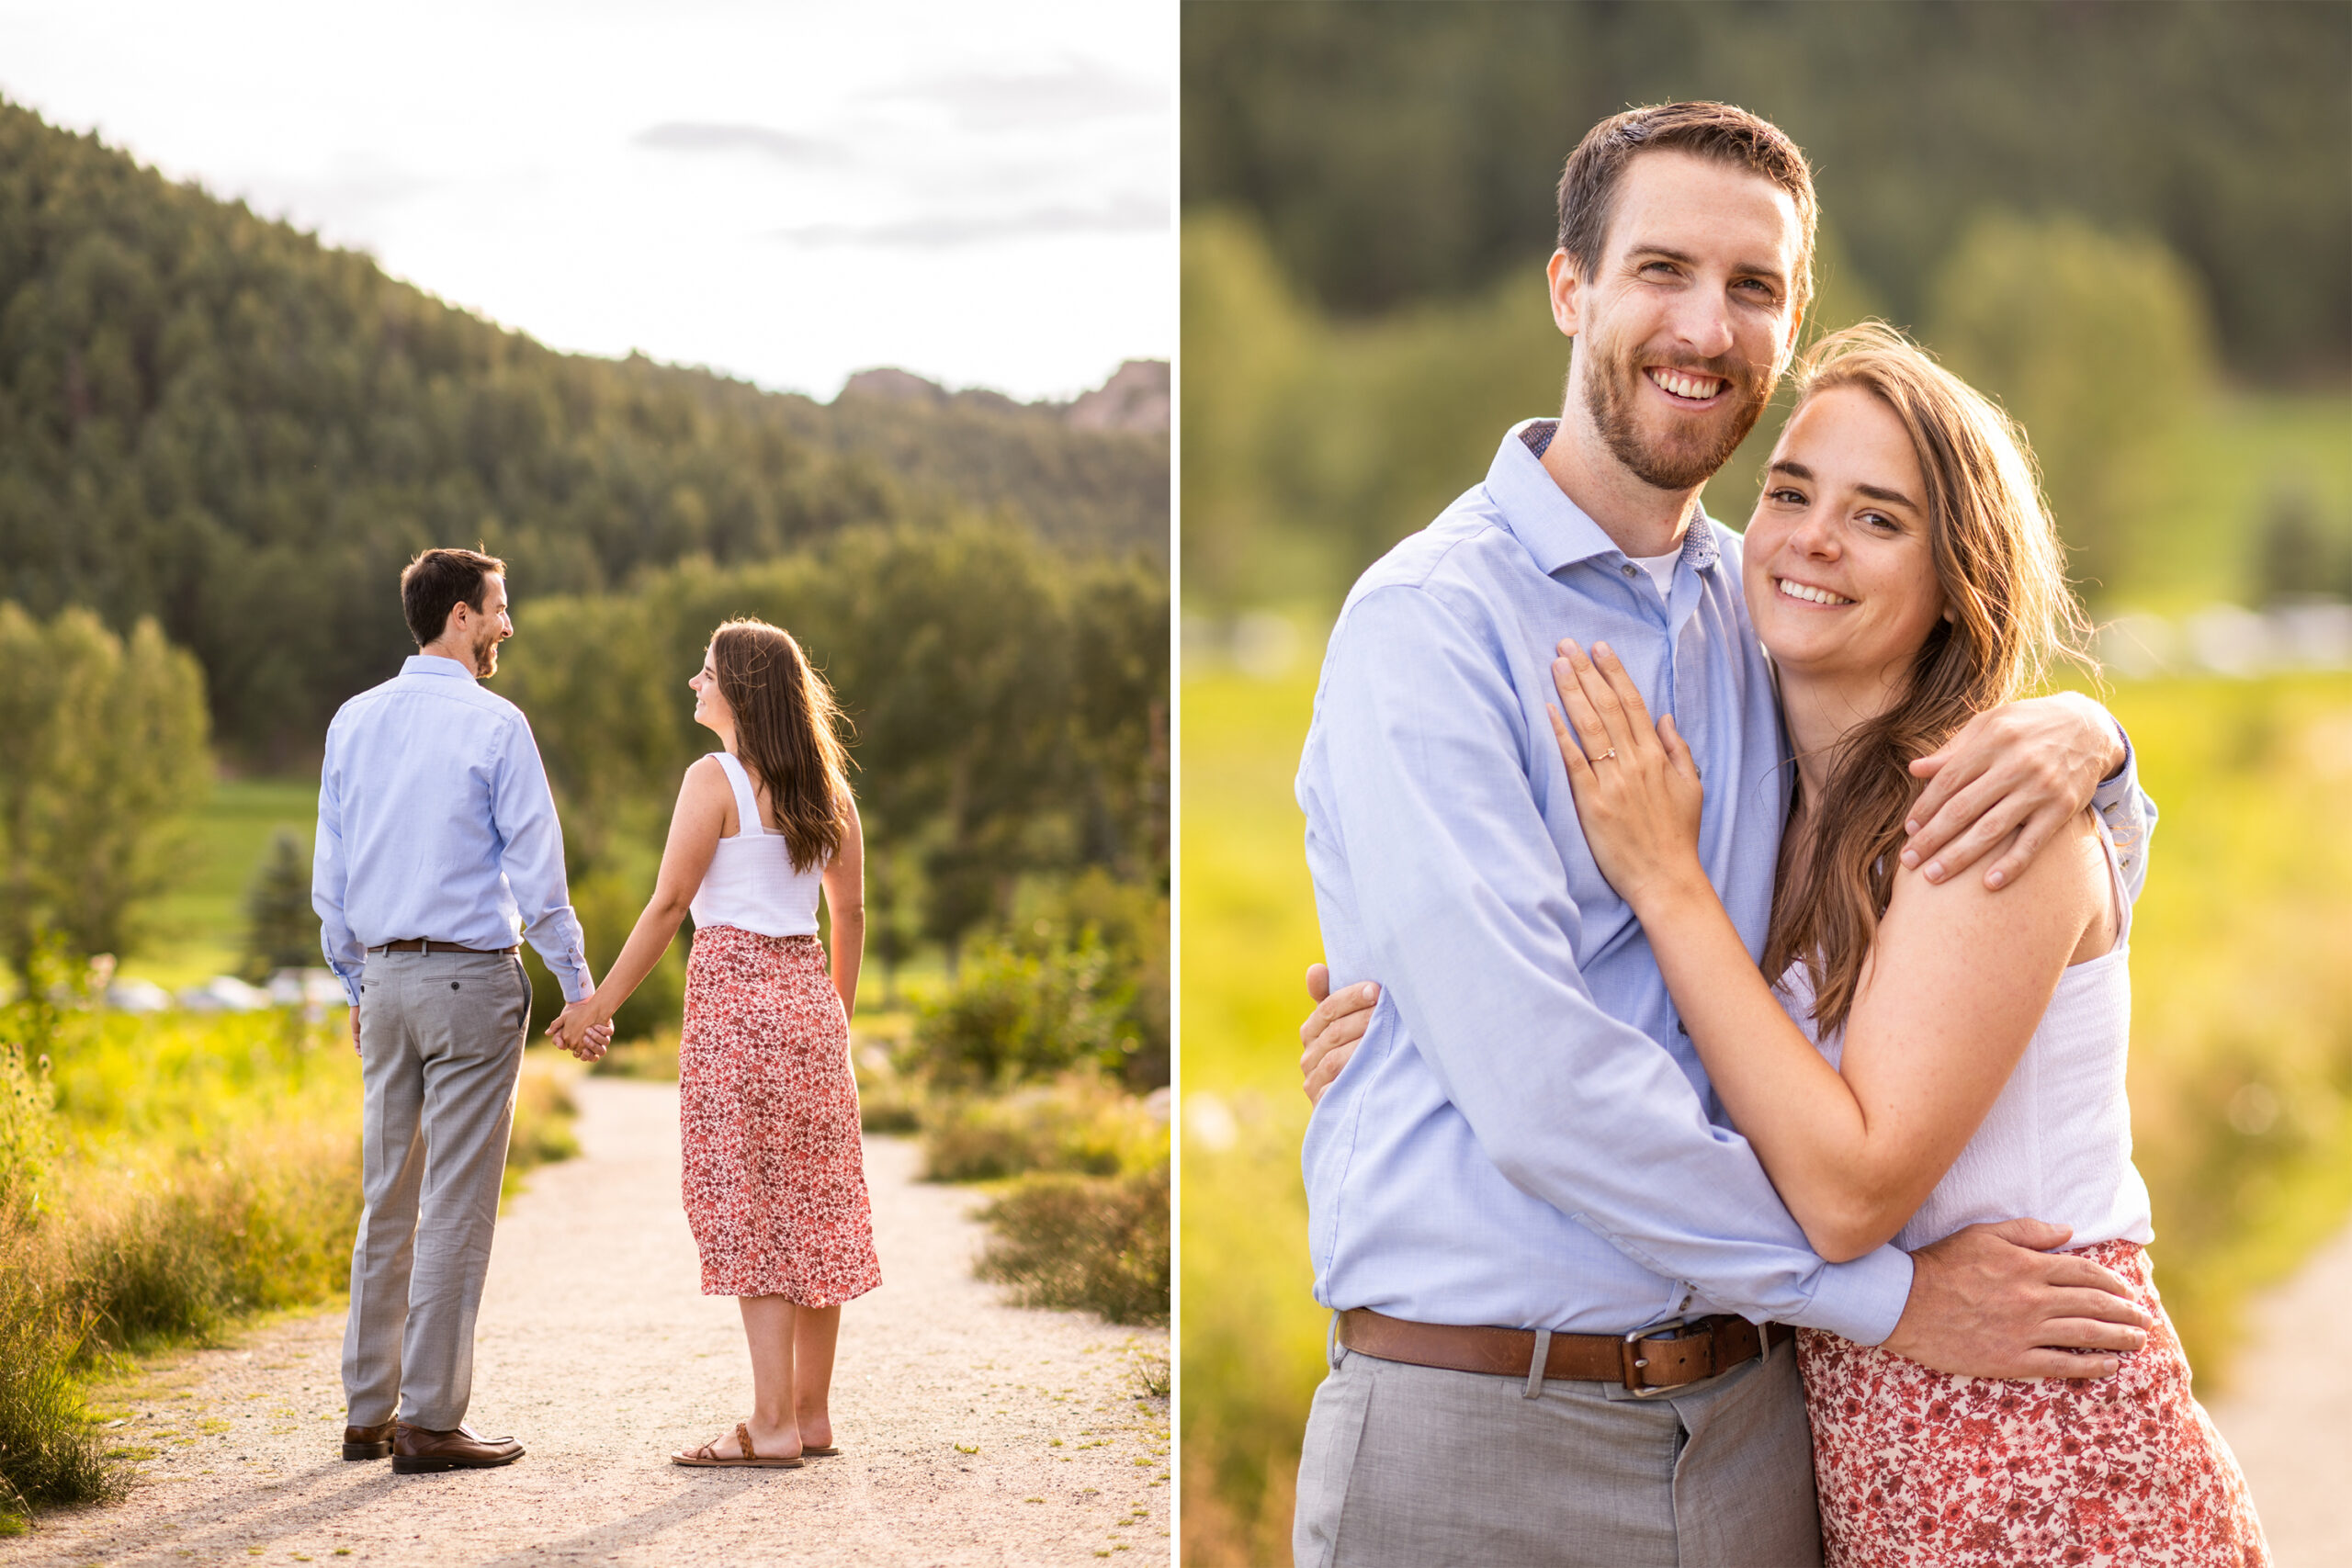 Alice and Joe hold hands and hug during an engagement photo shoot at Evergreen Lake in Evergreen, Colorado.